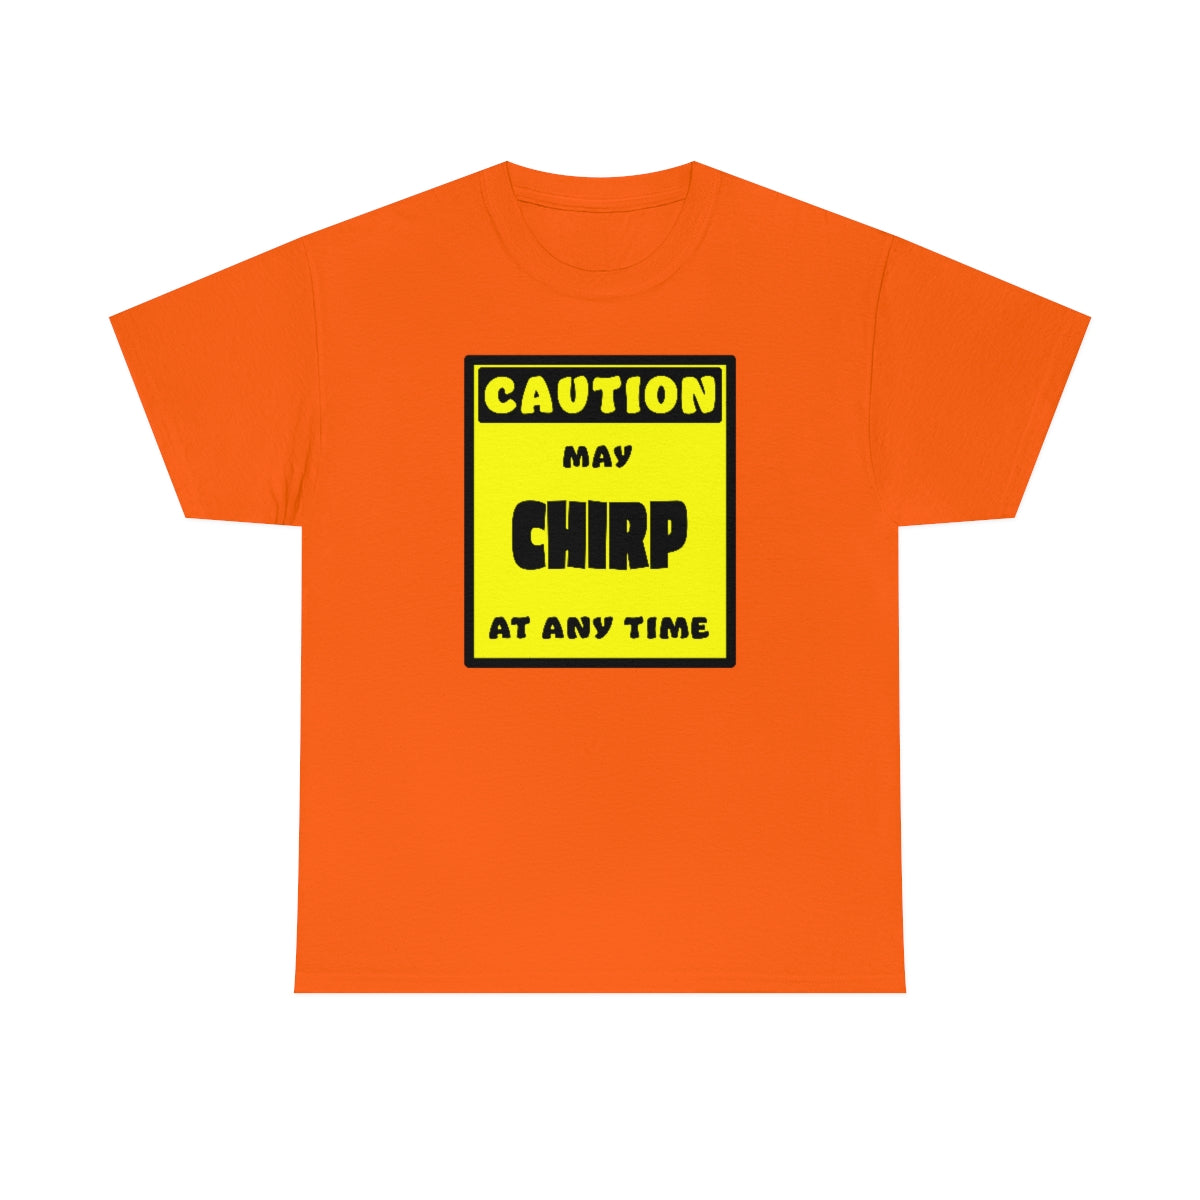 CAUTION! May CHIRP at any time! - T-Shirt T-Shirt AFLT-Whootorca Orange S 